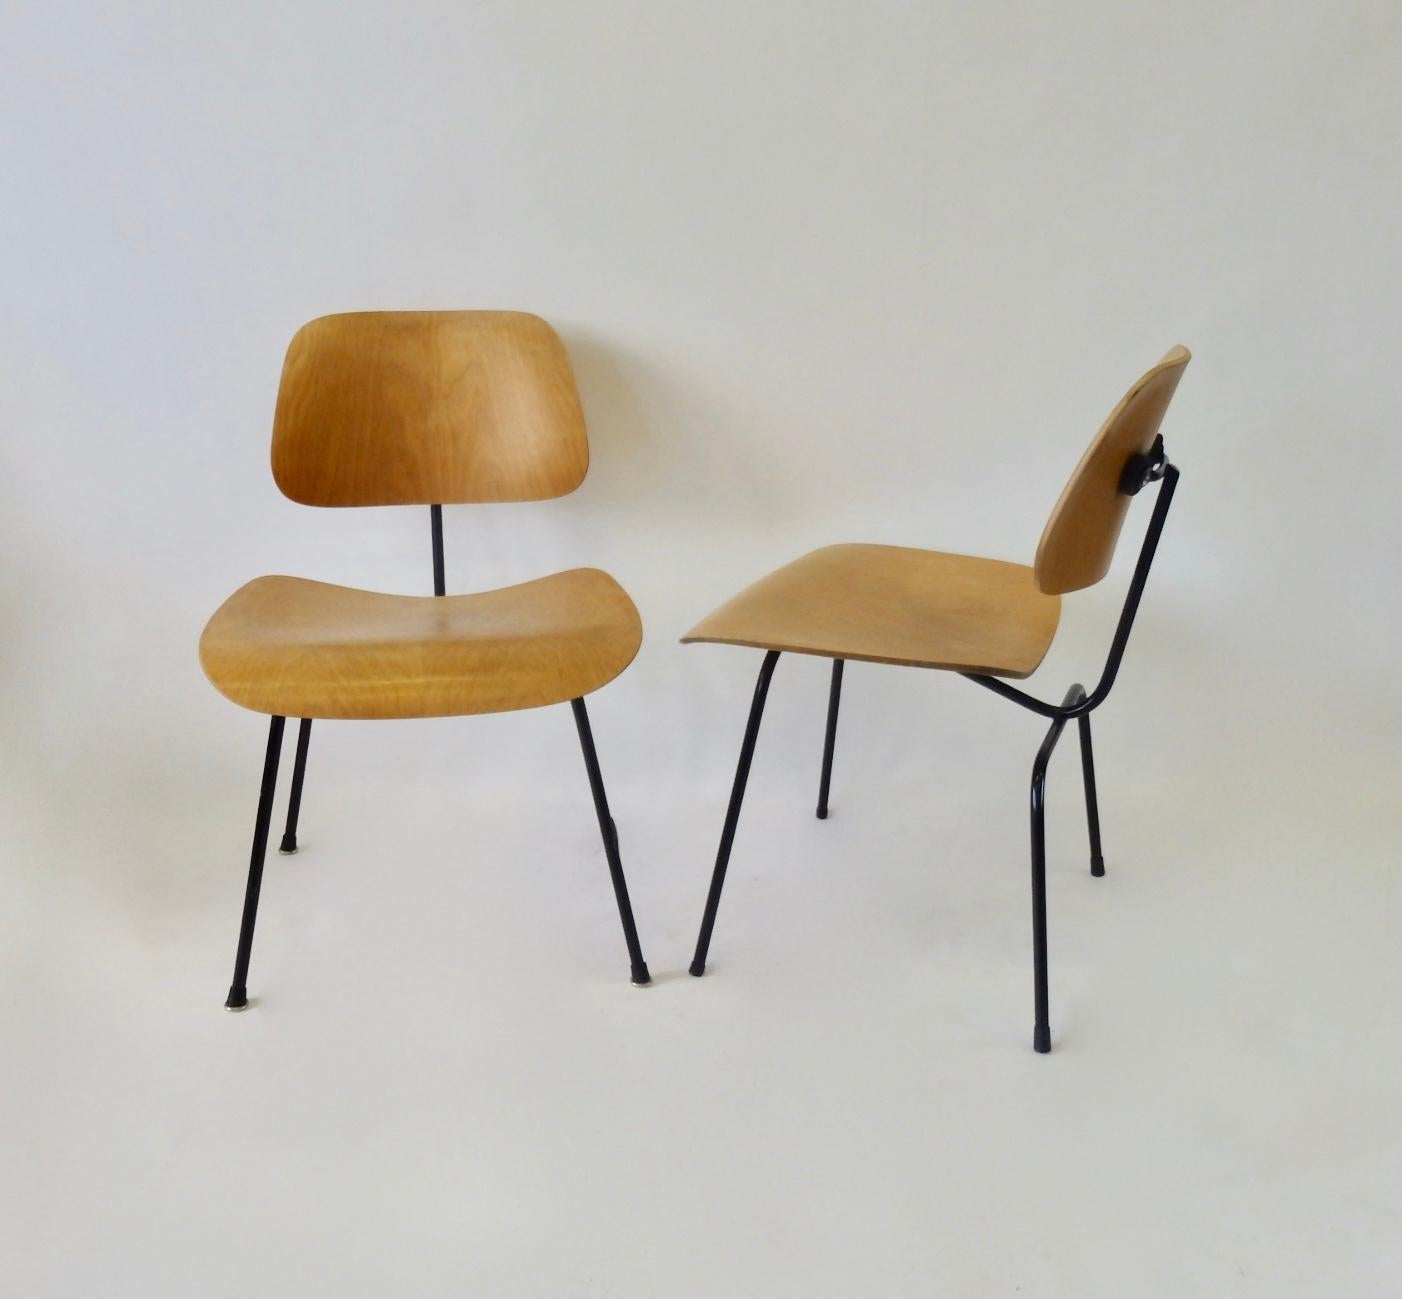 Pair of Eames dining chair metal ( DCM ) for Herman Miller. Blonde laminate plywood seats in original finish on recently matte black powder coated wrought iron frames.